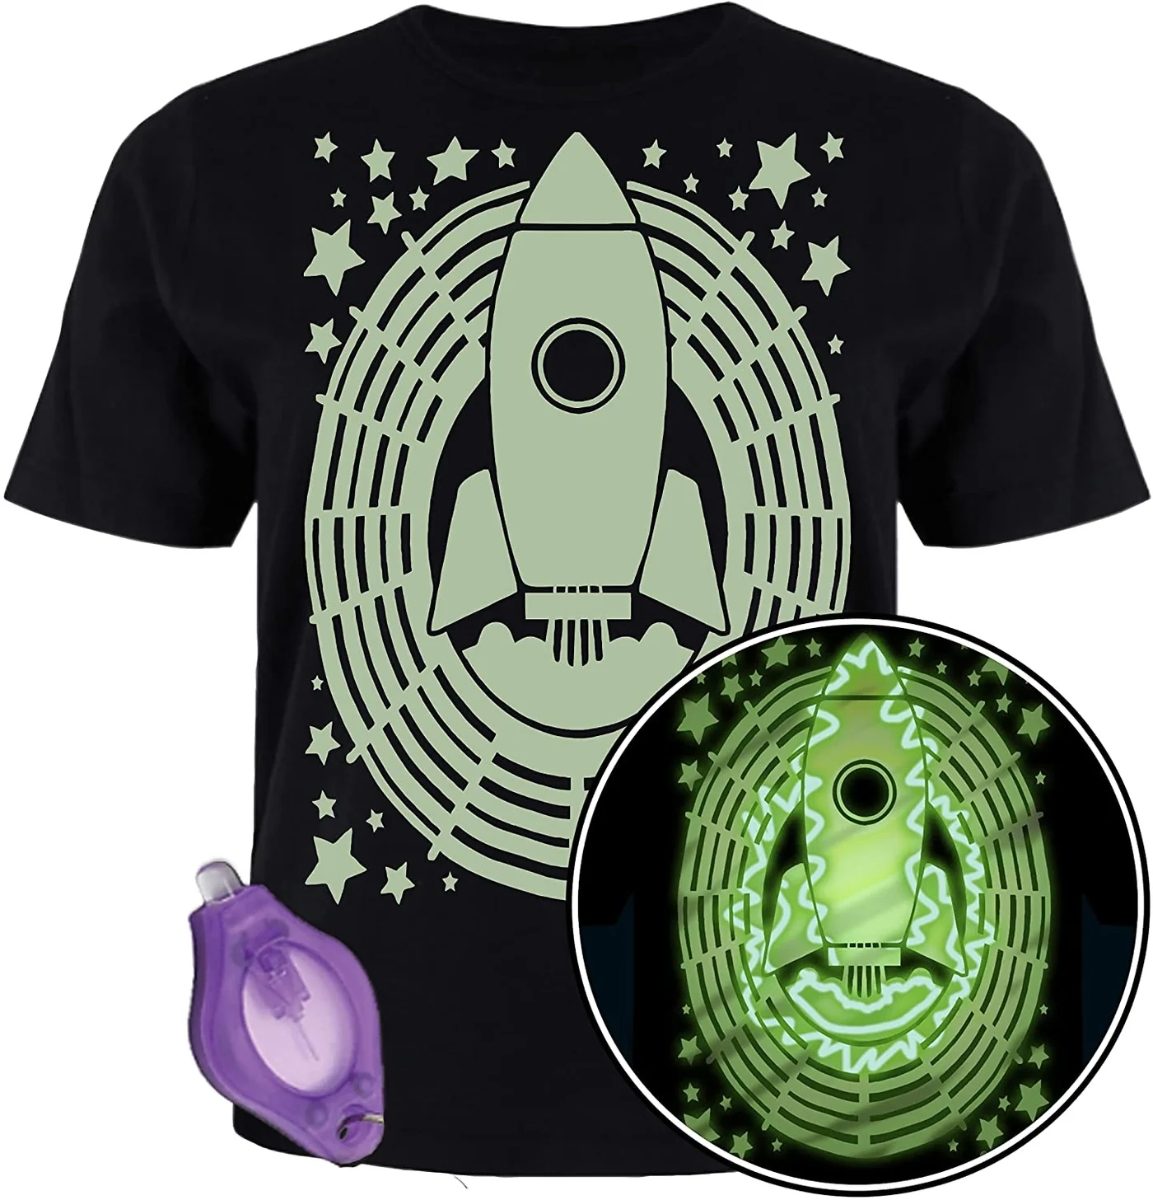 SPACE GLOW COLOUR IN T-SHIRT AGED 5 - 6